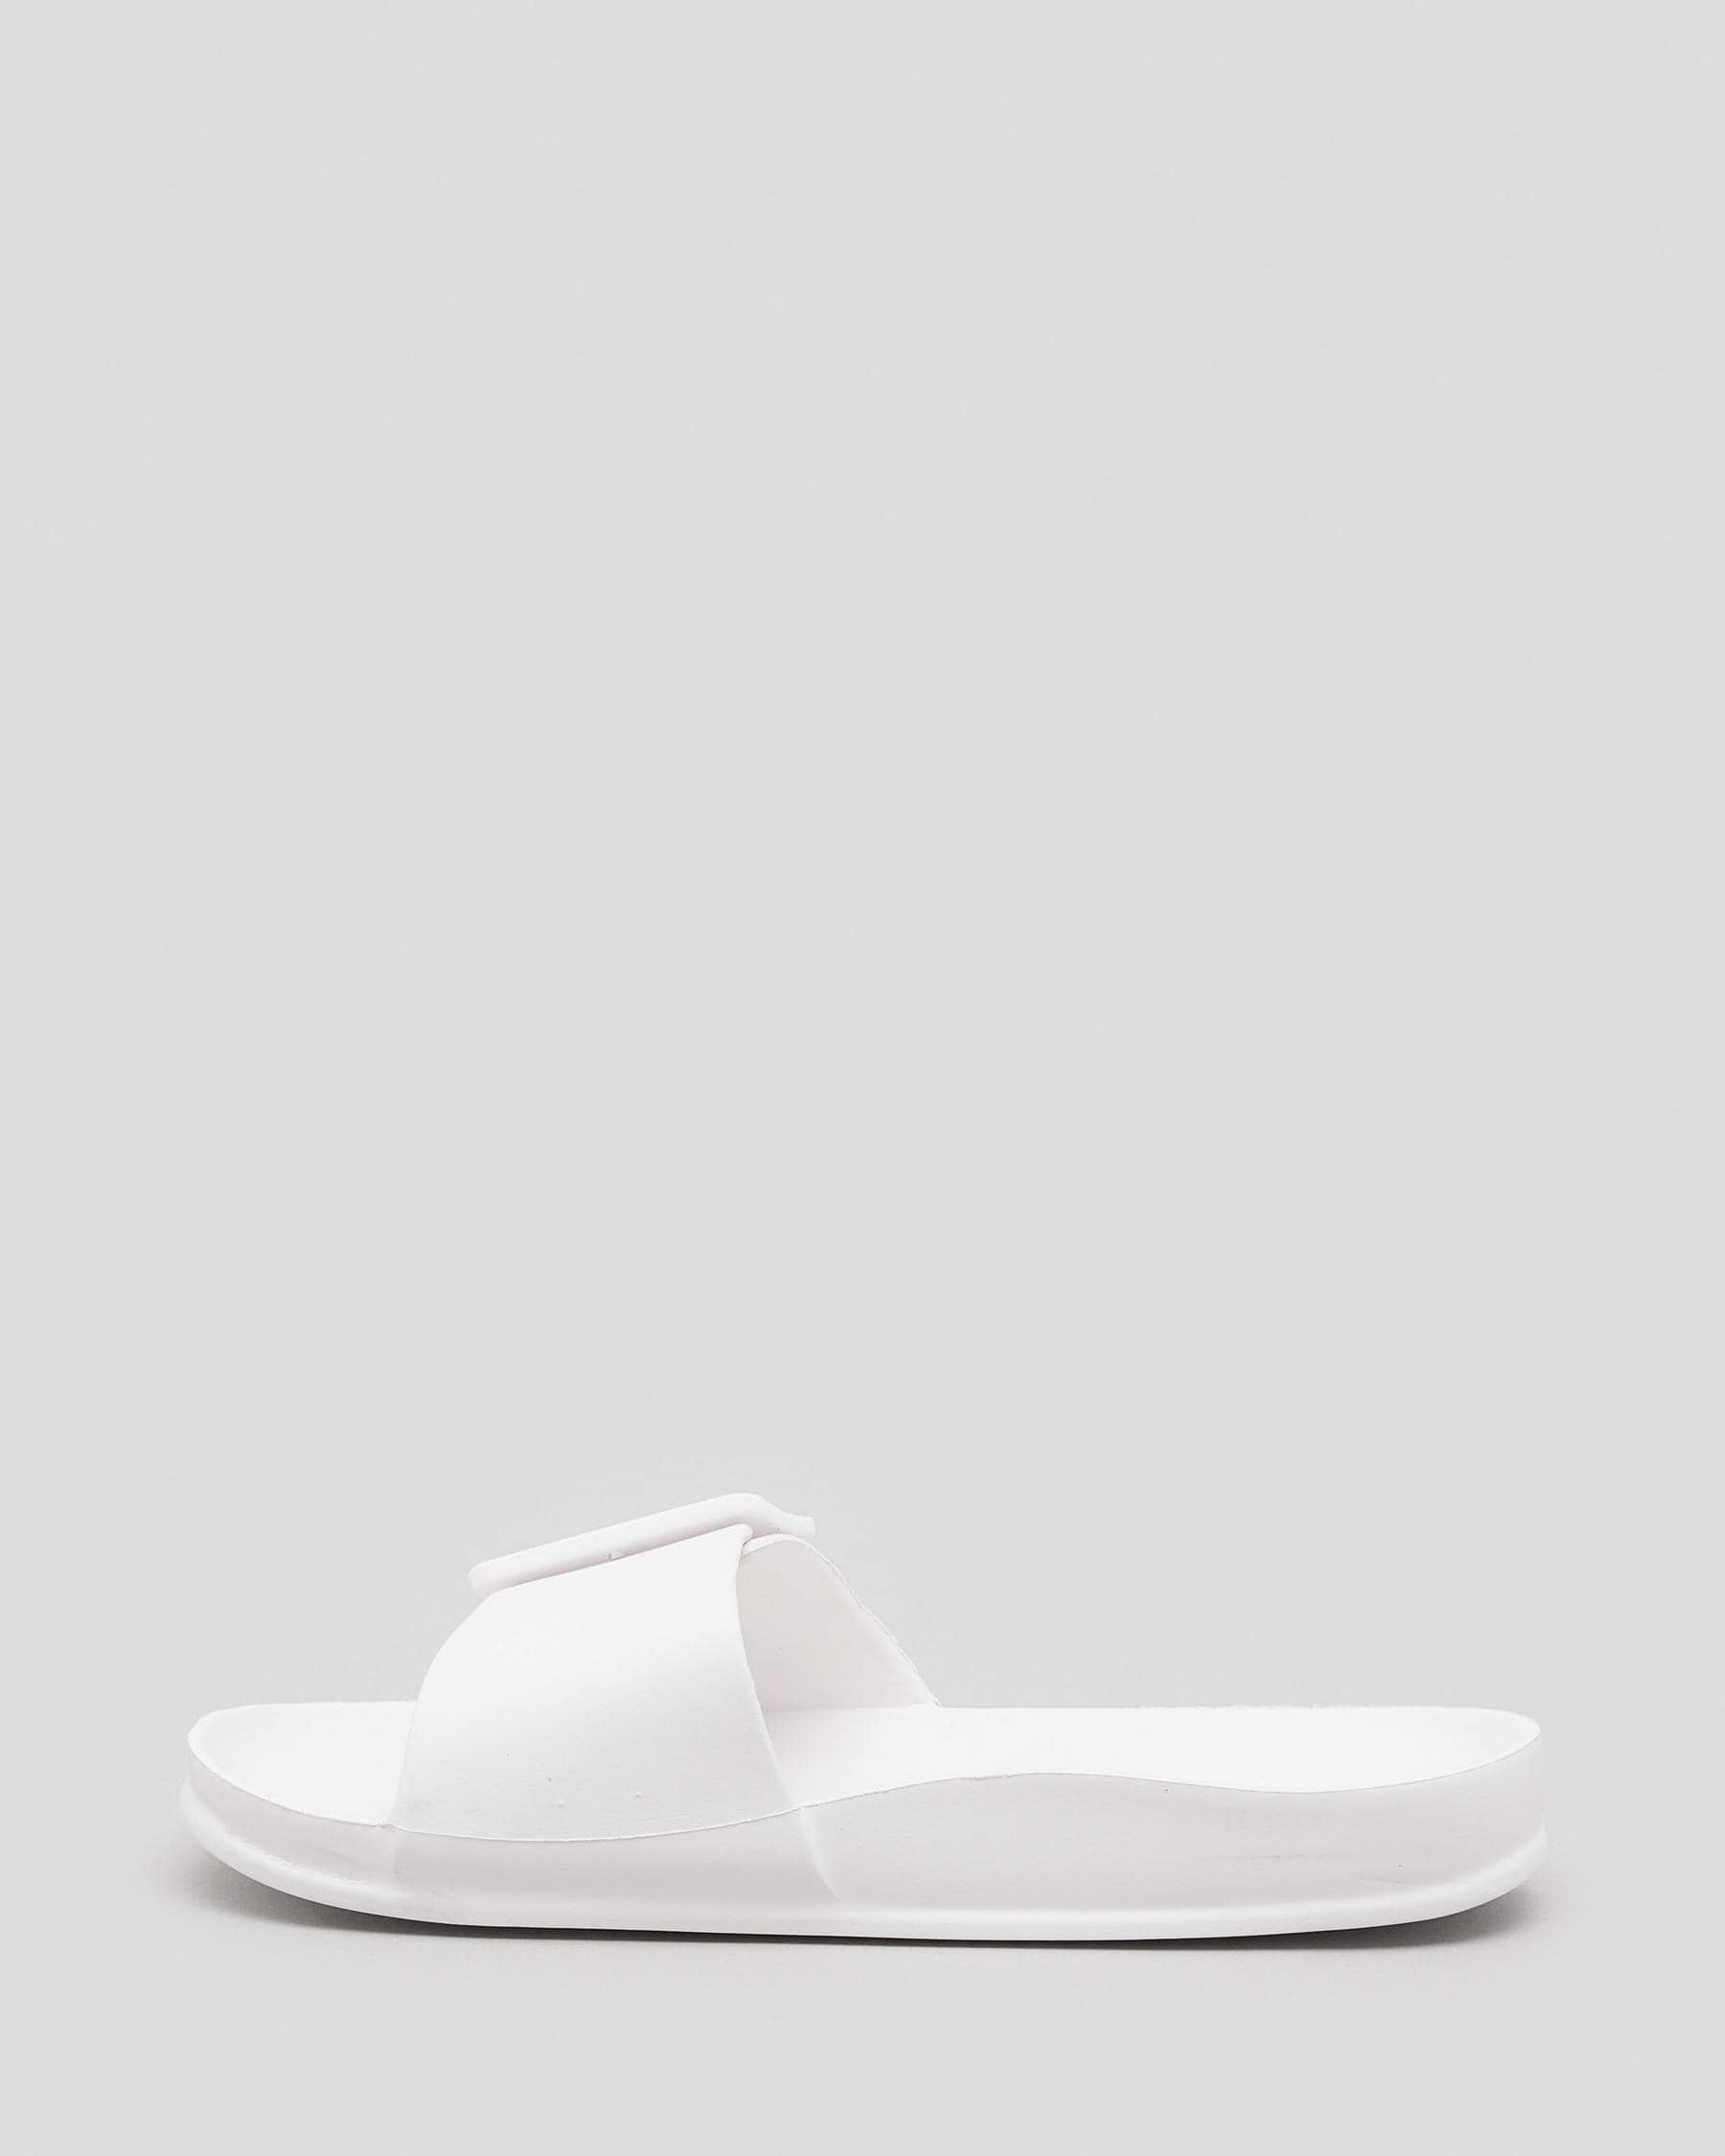 Ava And Ever Tampa Sandals In White | City Beach Australia